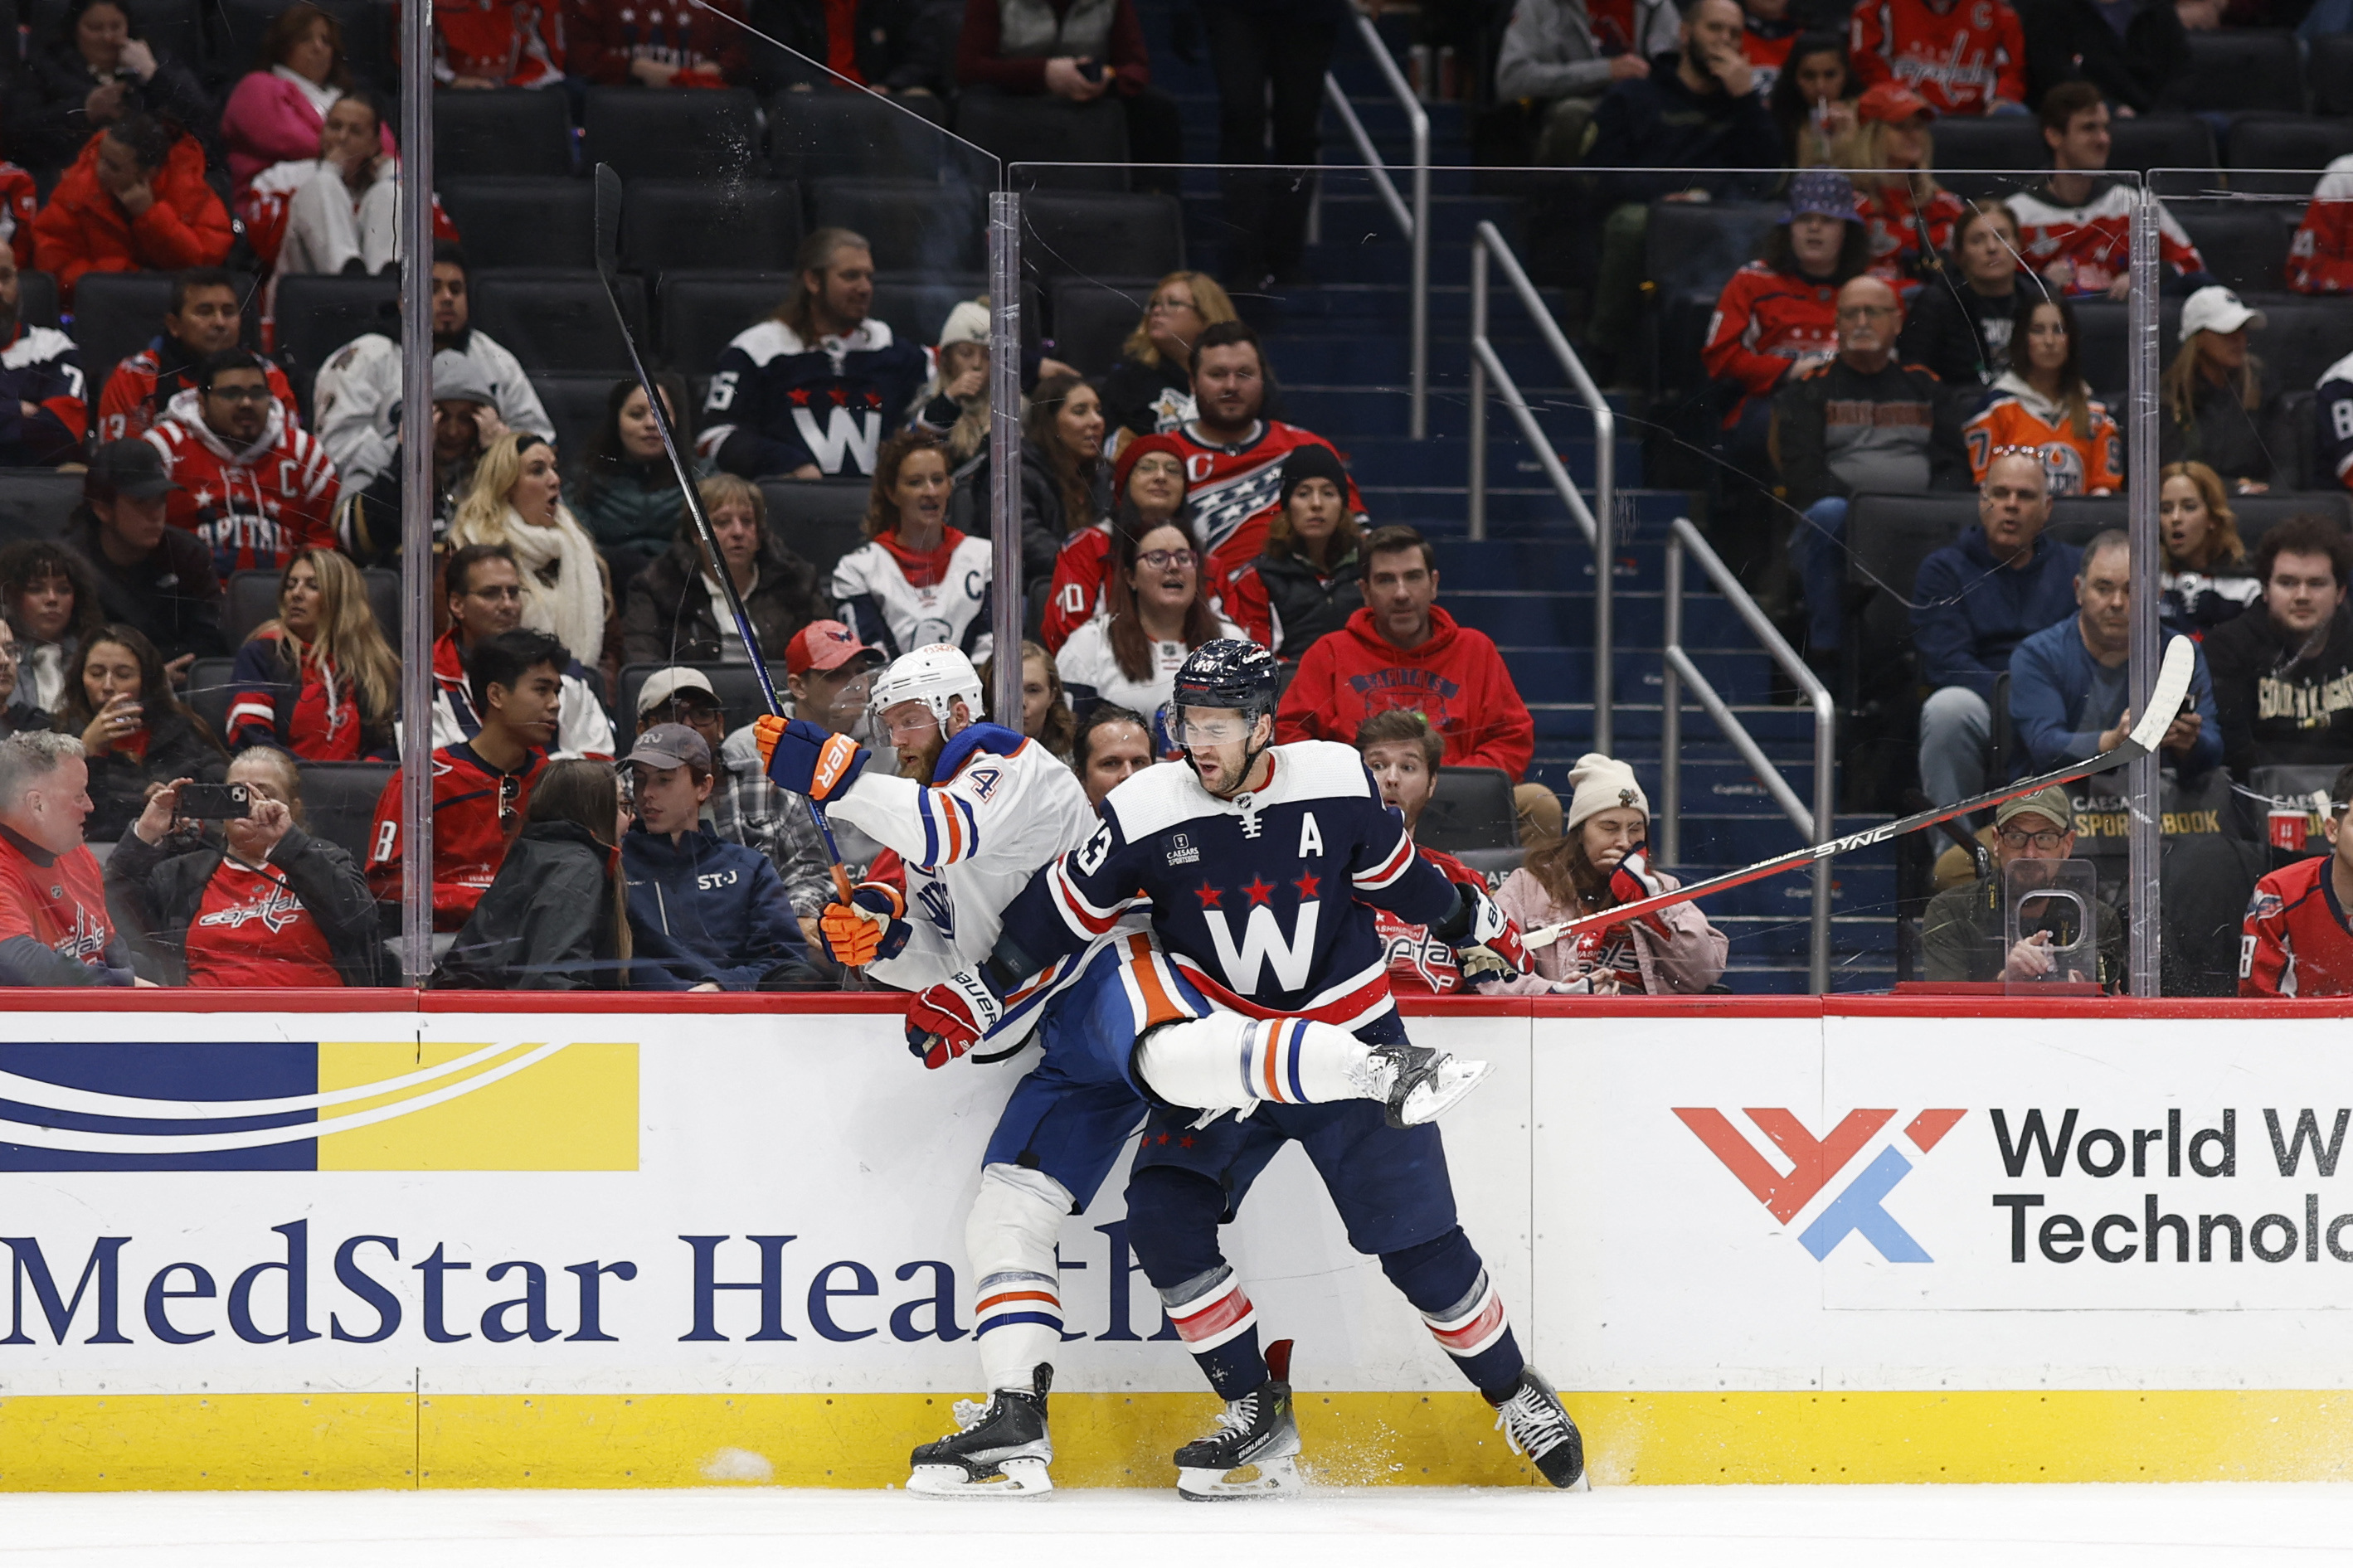 Oilers end skid with shutout win over Capitals | Reuters